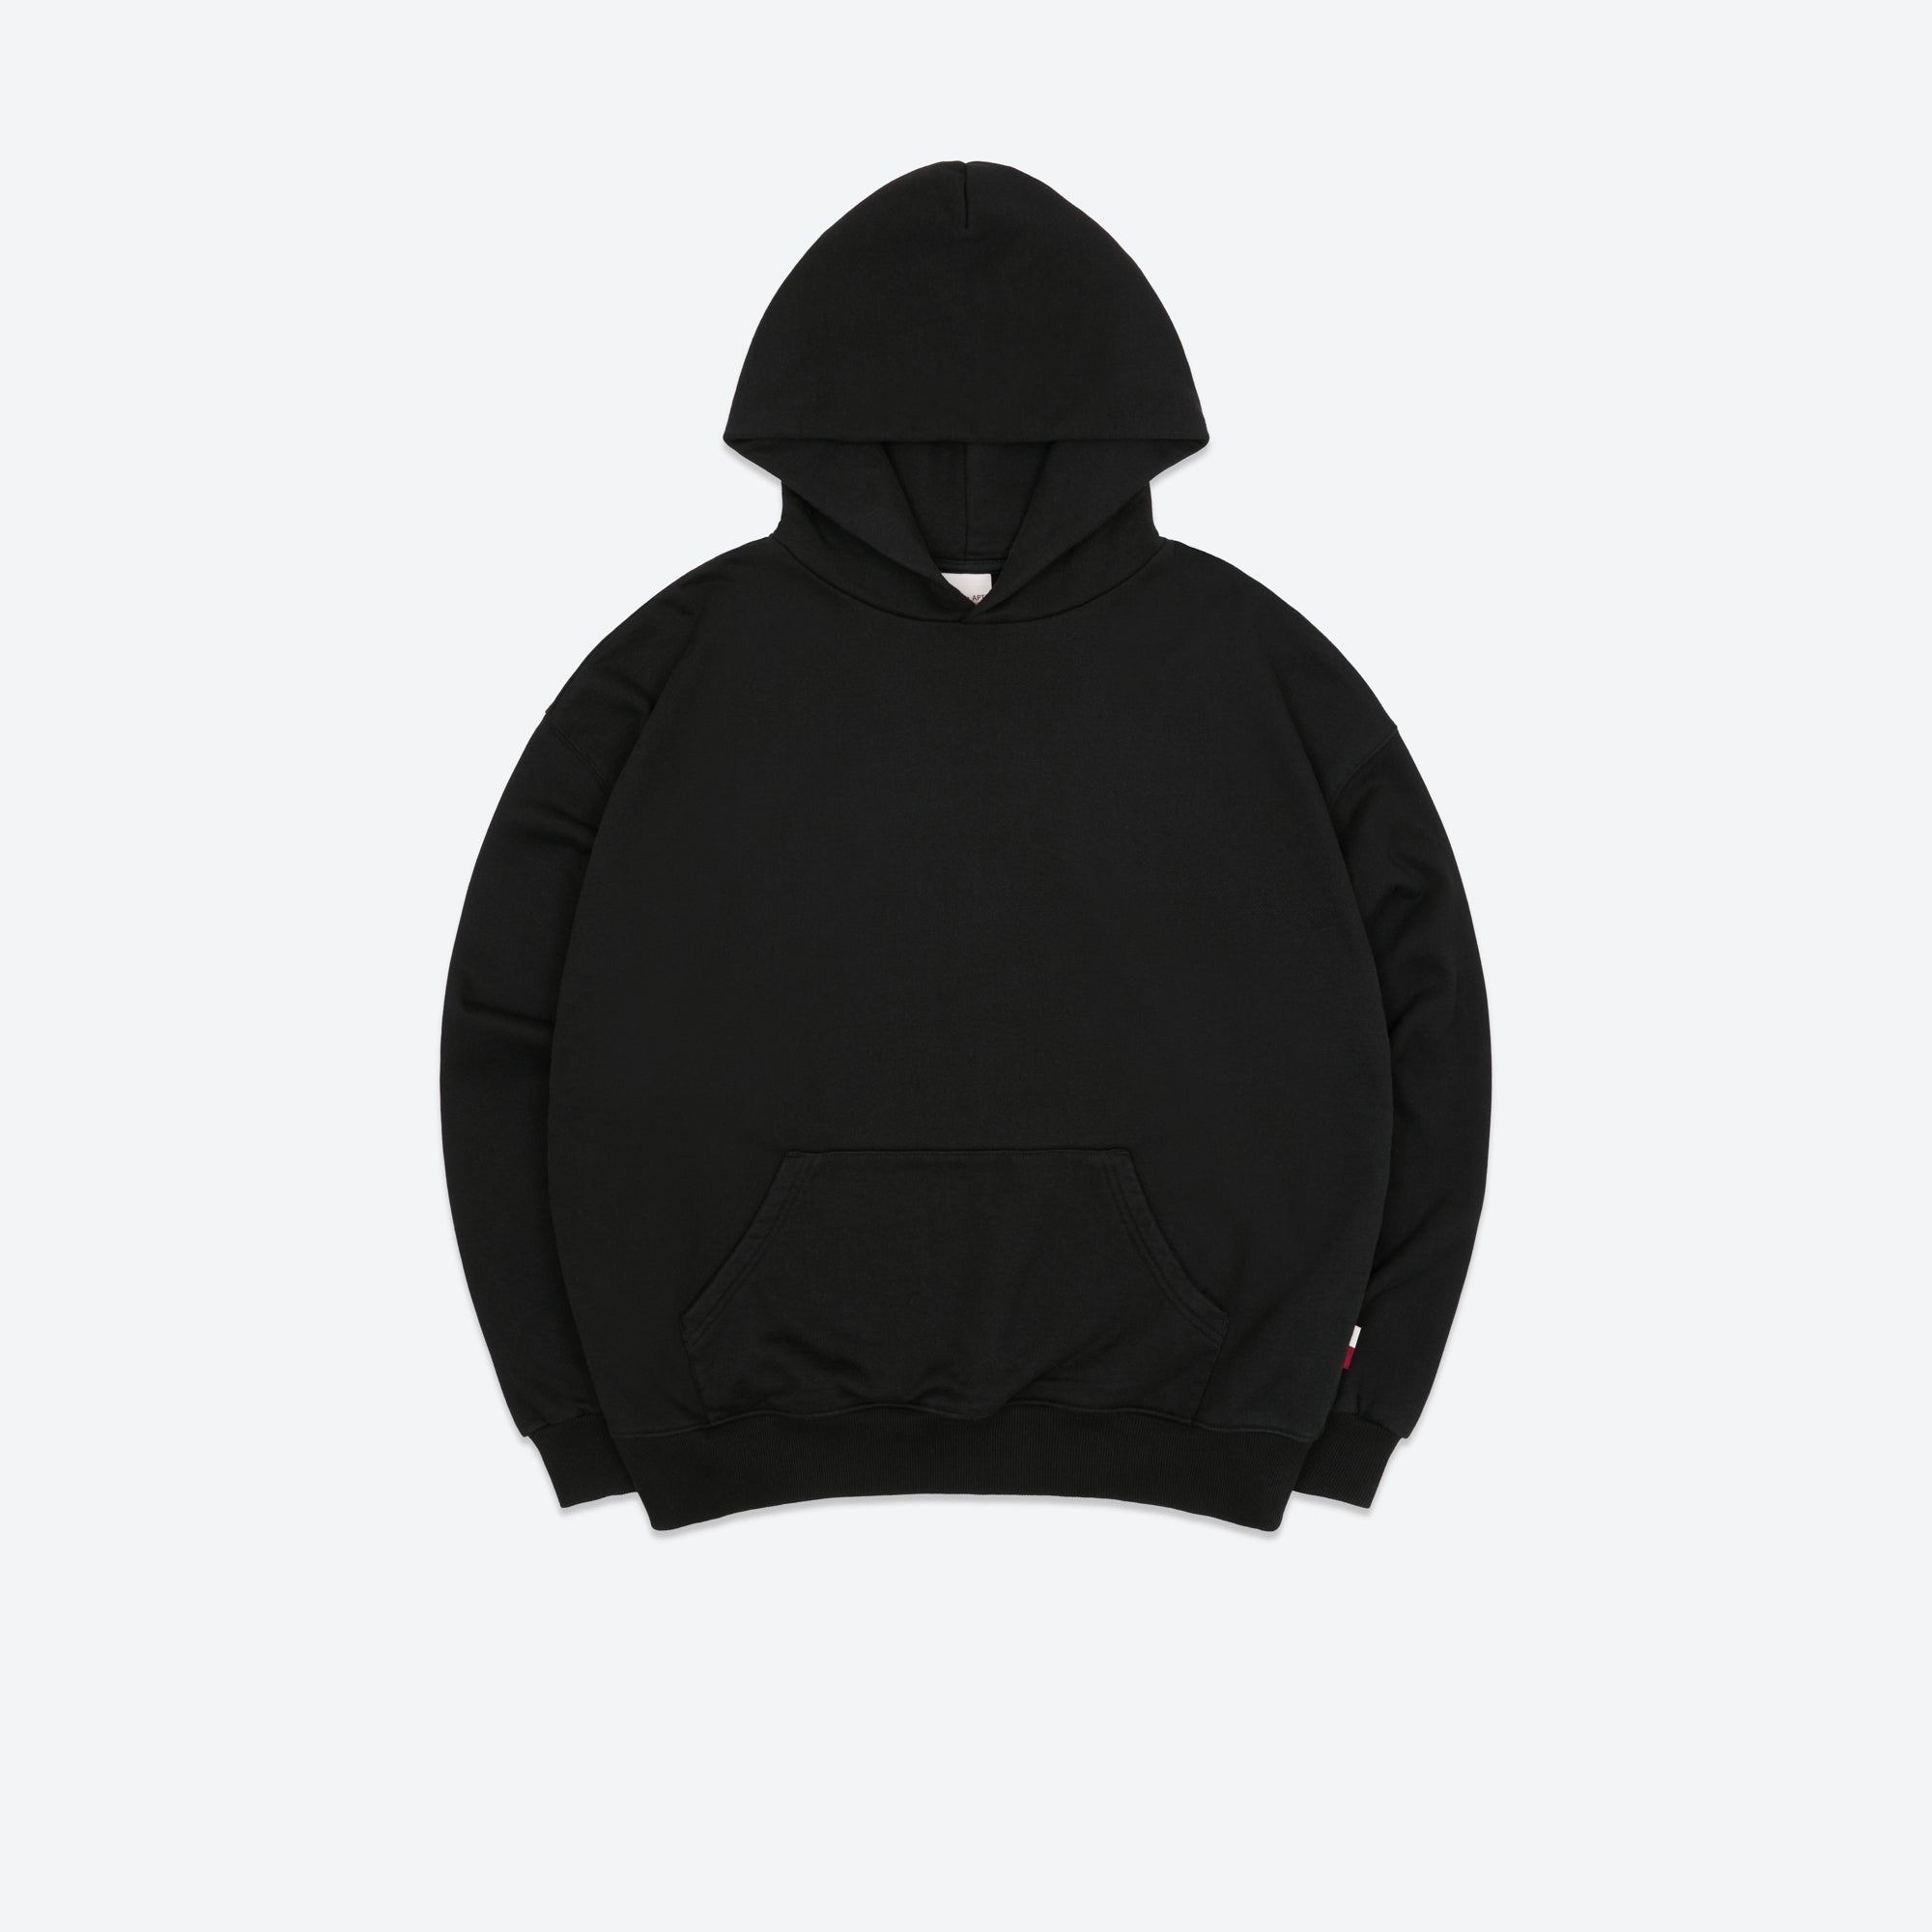 Alfred's Apartment - Trusted Hood - Black